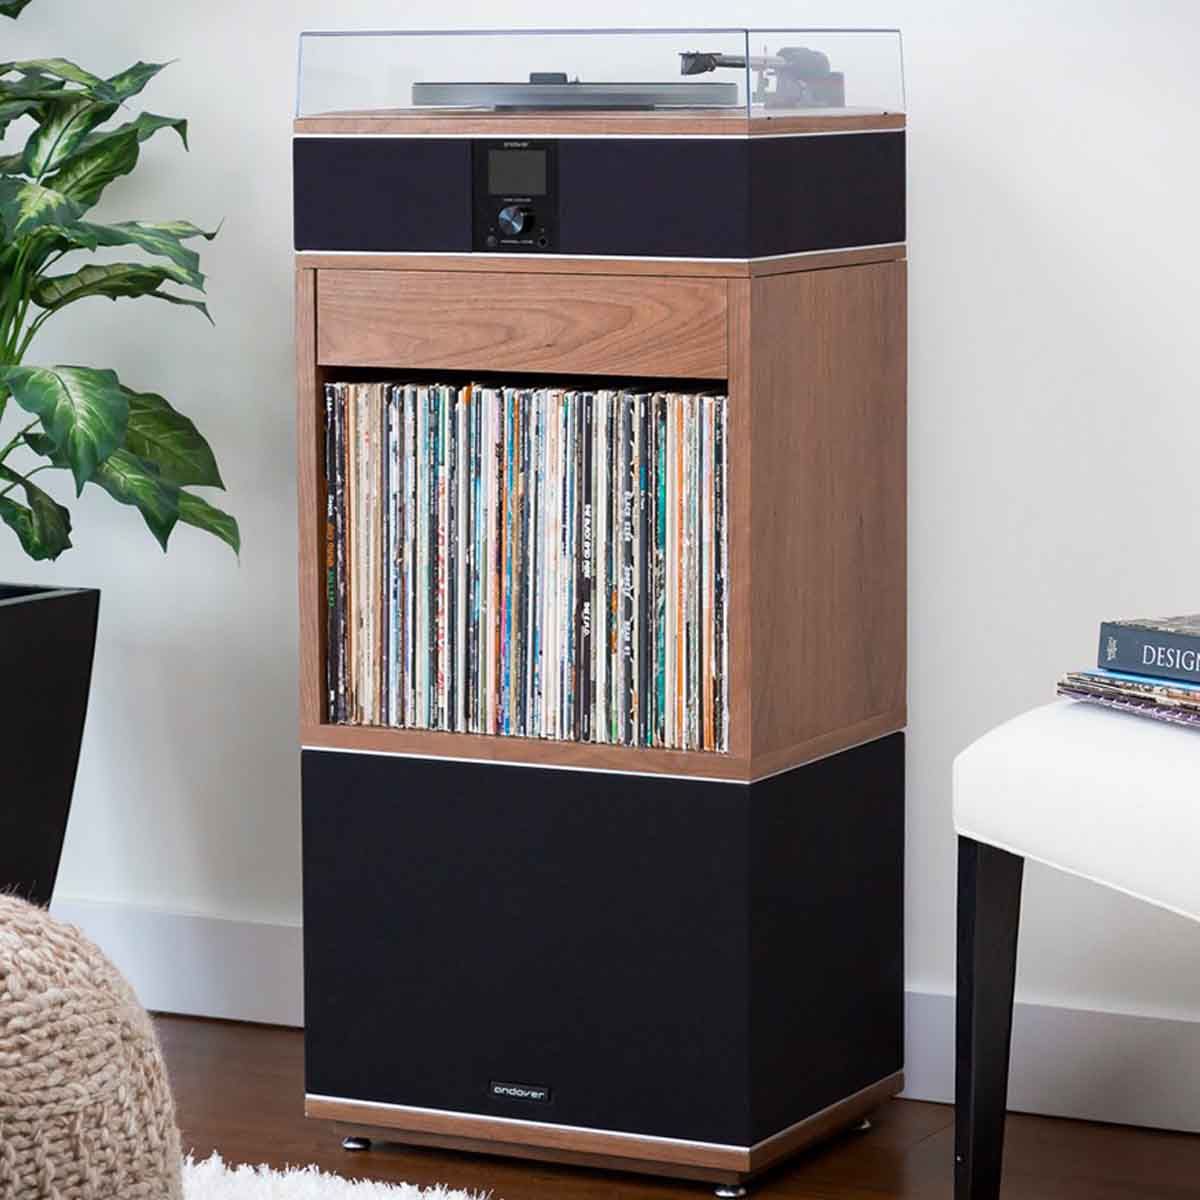 Andover Audio Model-One Upper Stand- lifestyle image with turntable and subwoofer